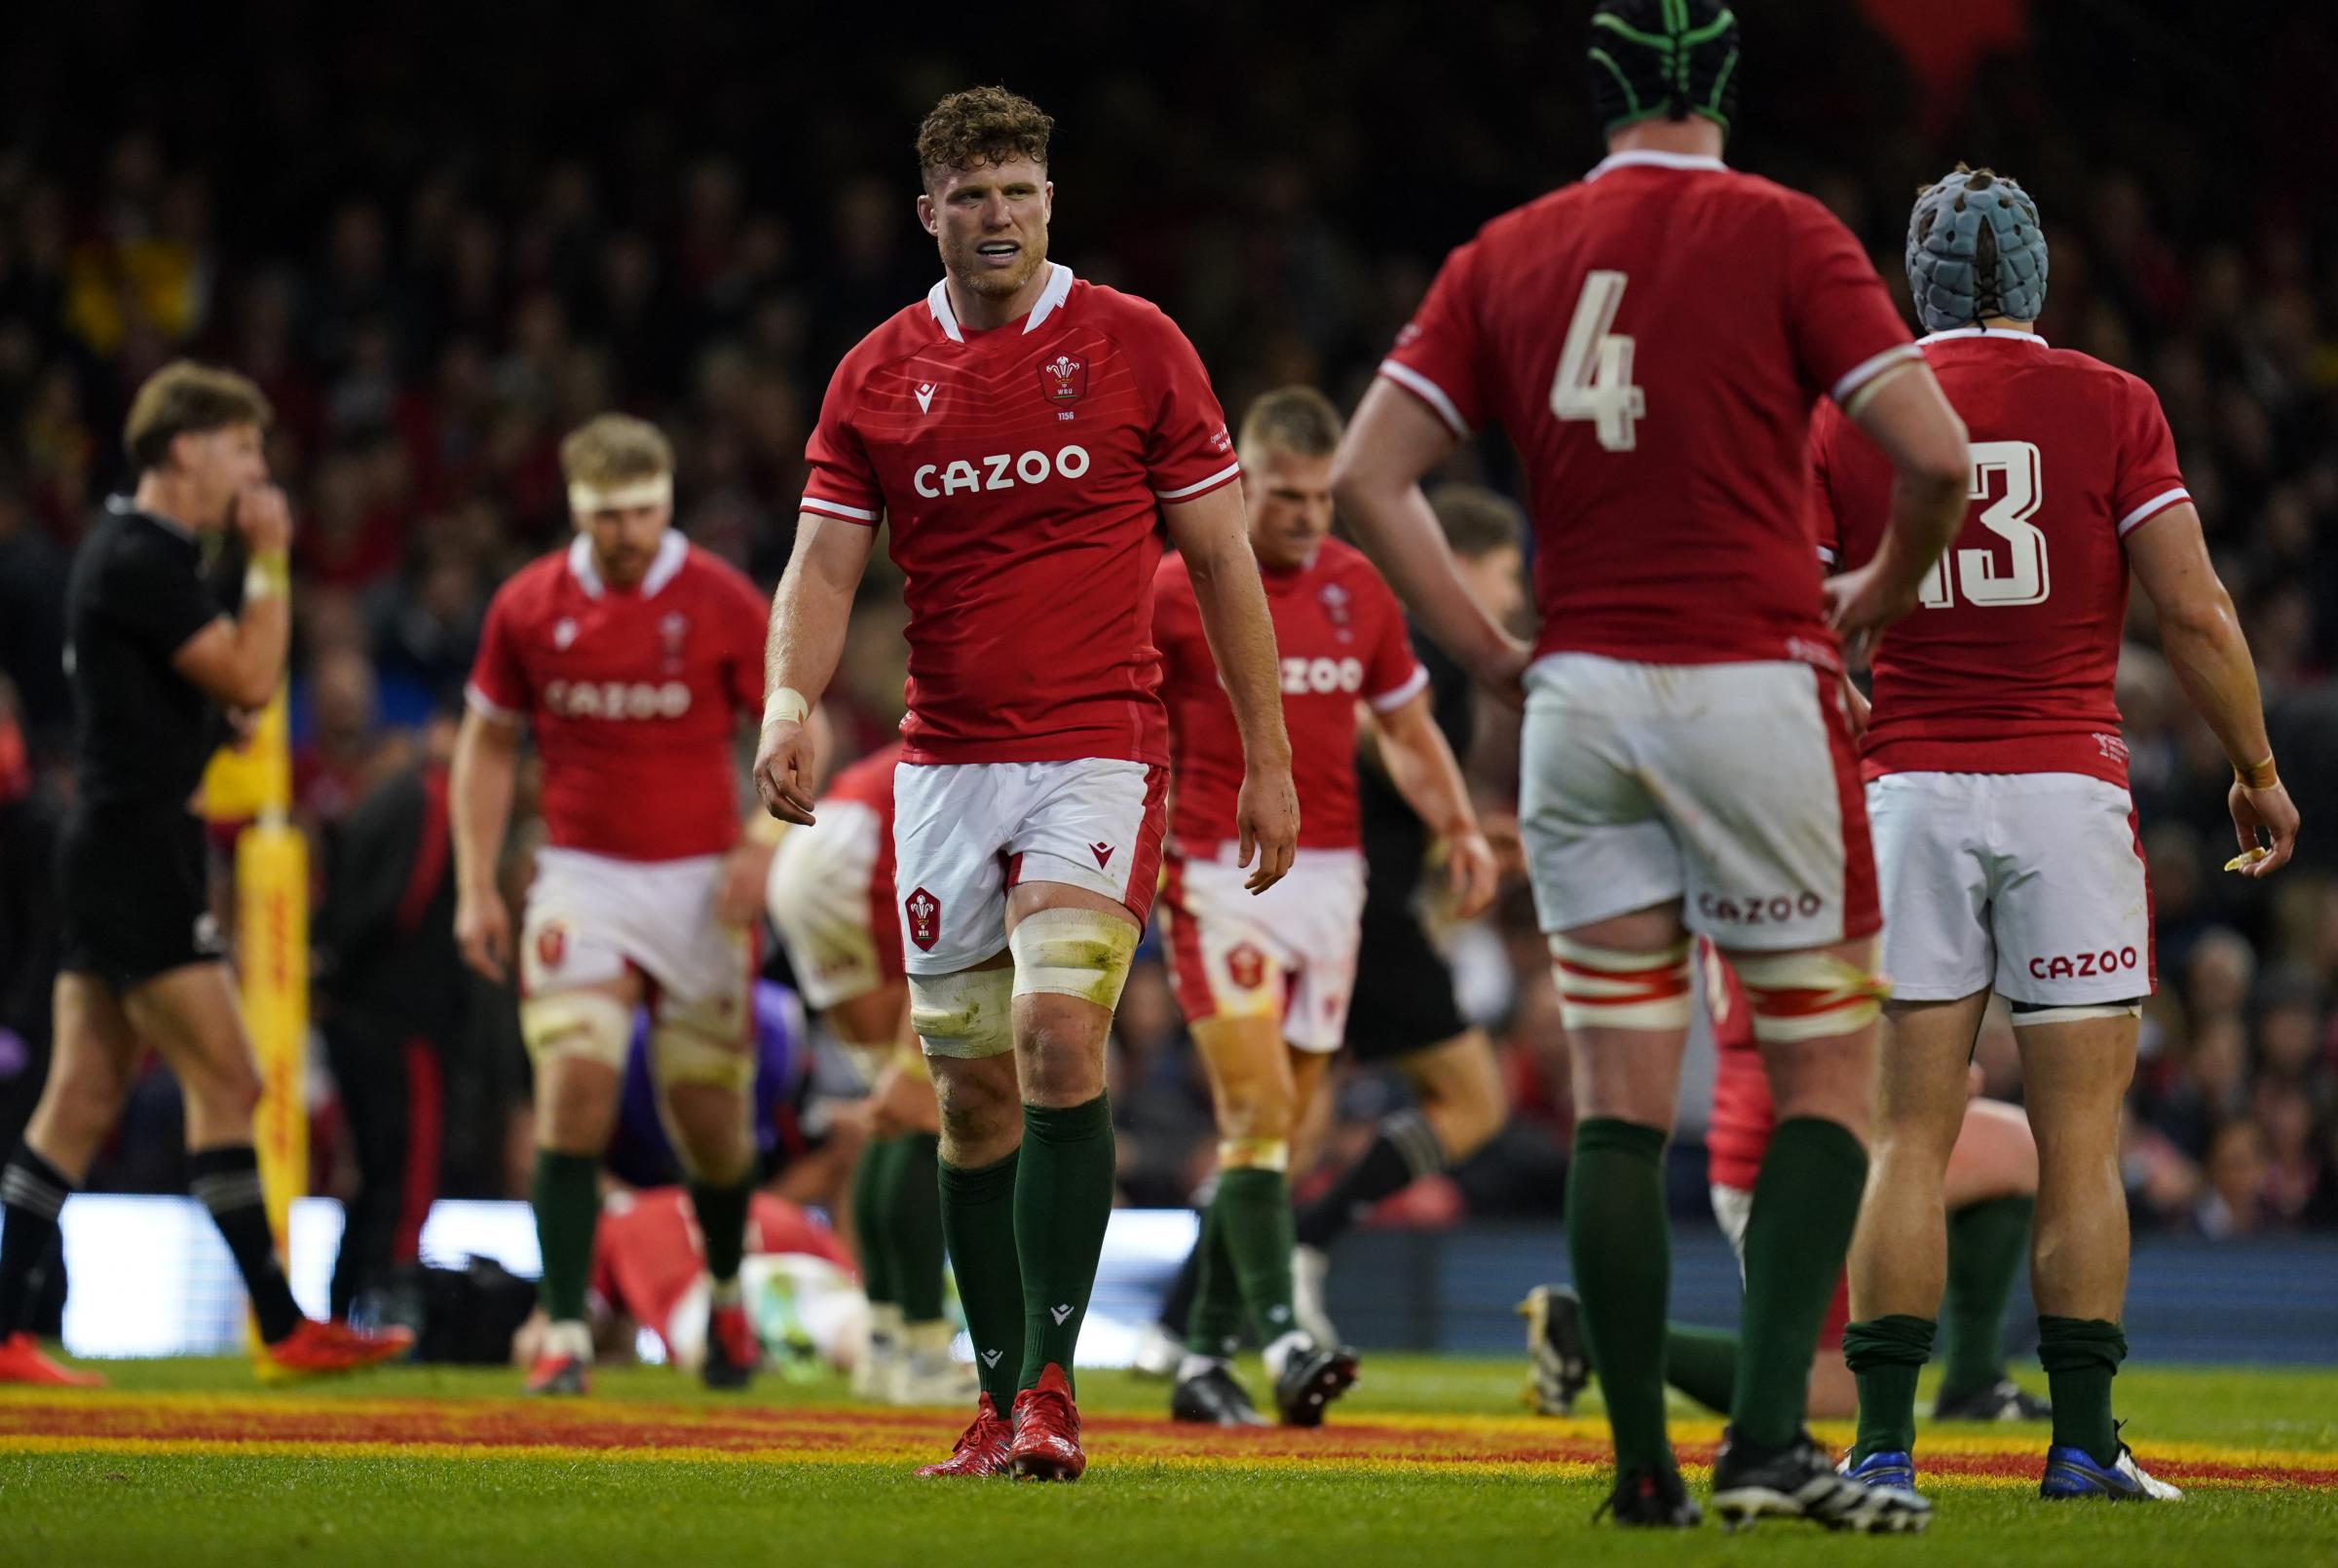 Dragons lock Will Rowlands is dejected after a New Zealand try against Wales